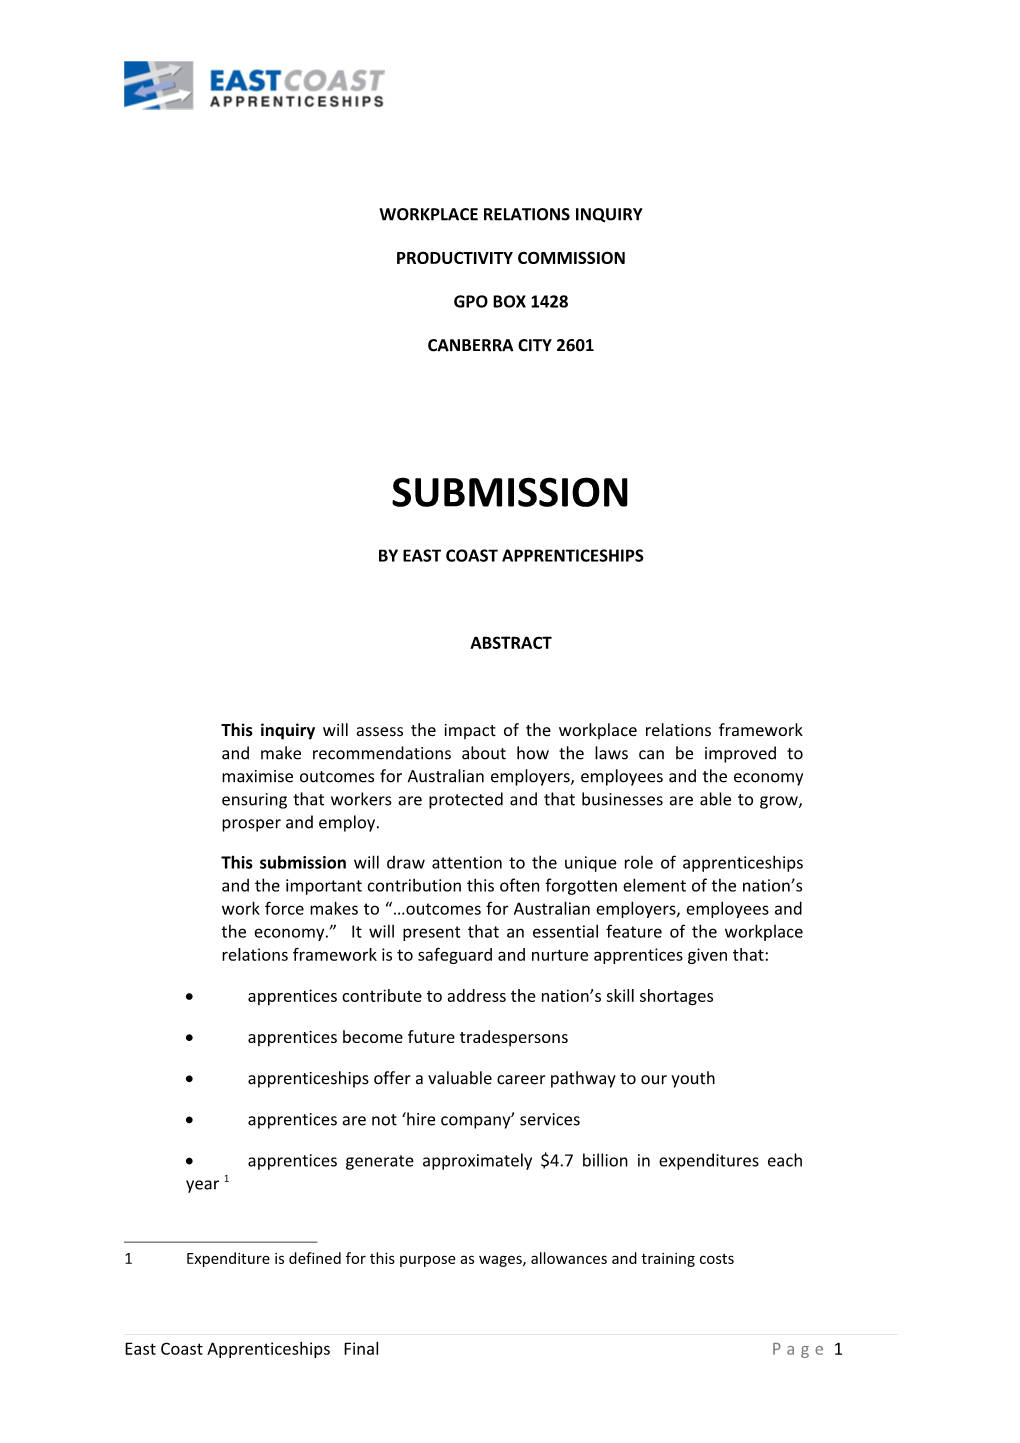 Submission 27 - East Coast Apprenticeships - Workplace Relations Framework - Public Inquiry